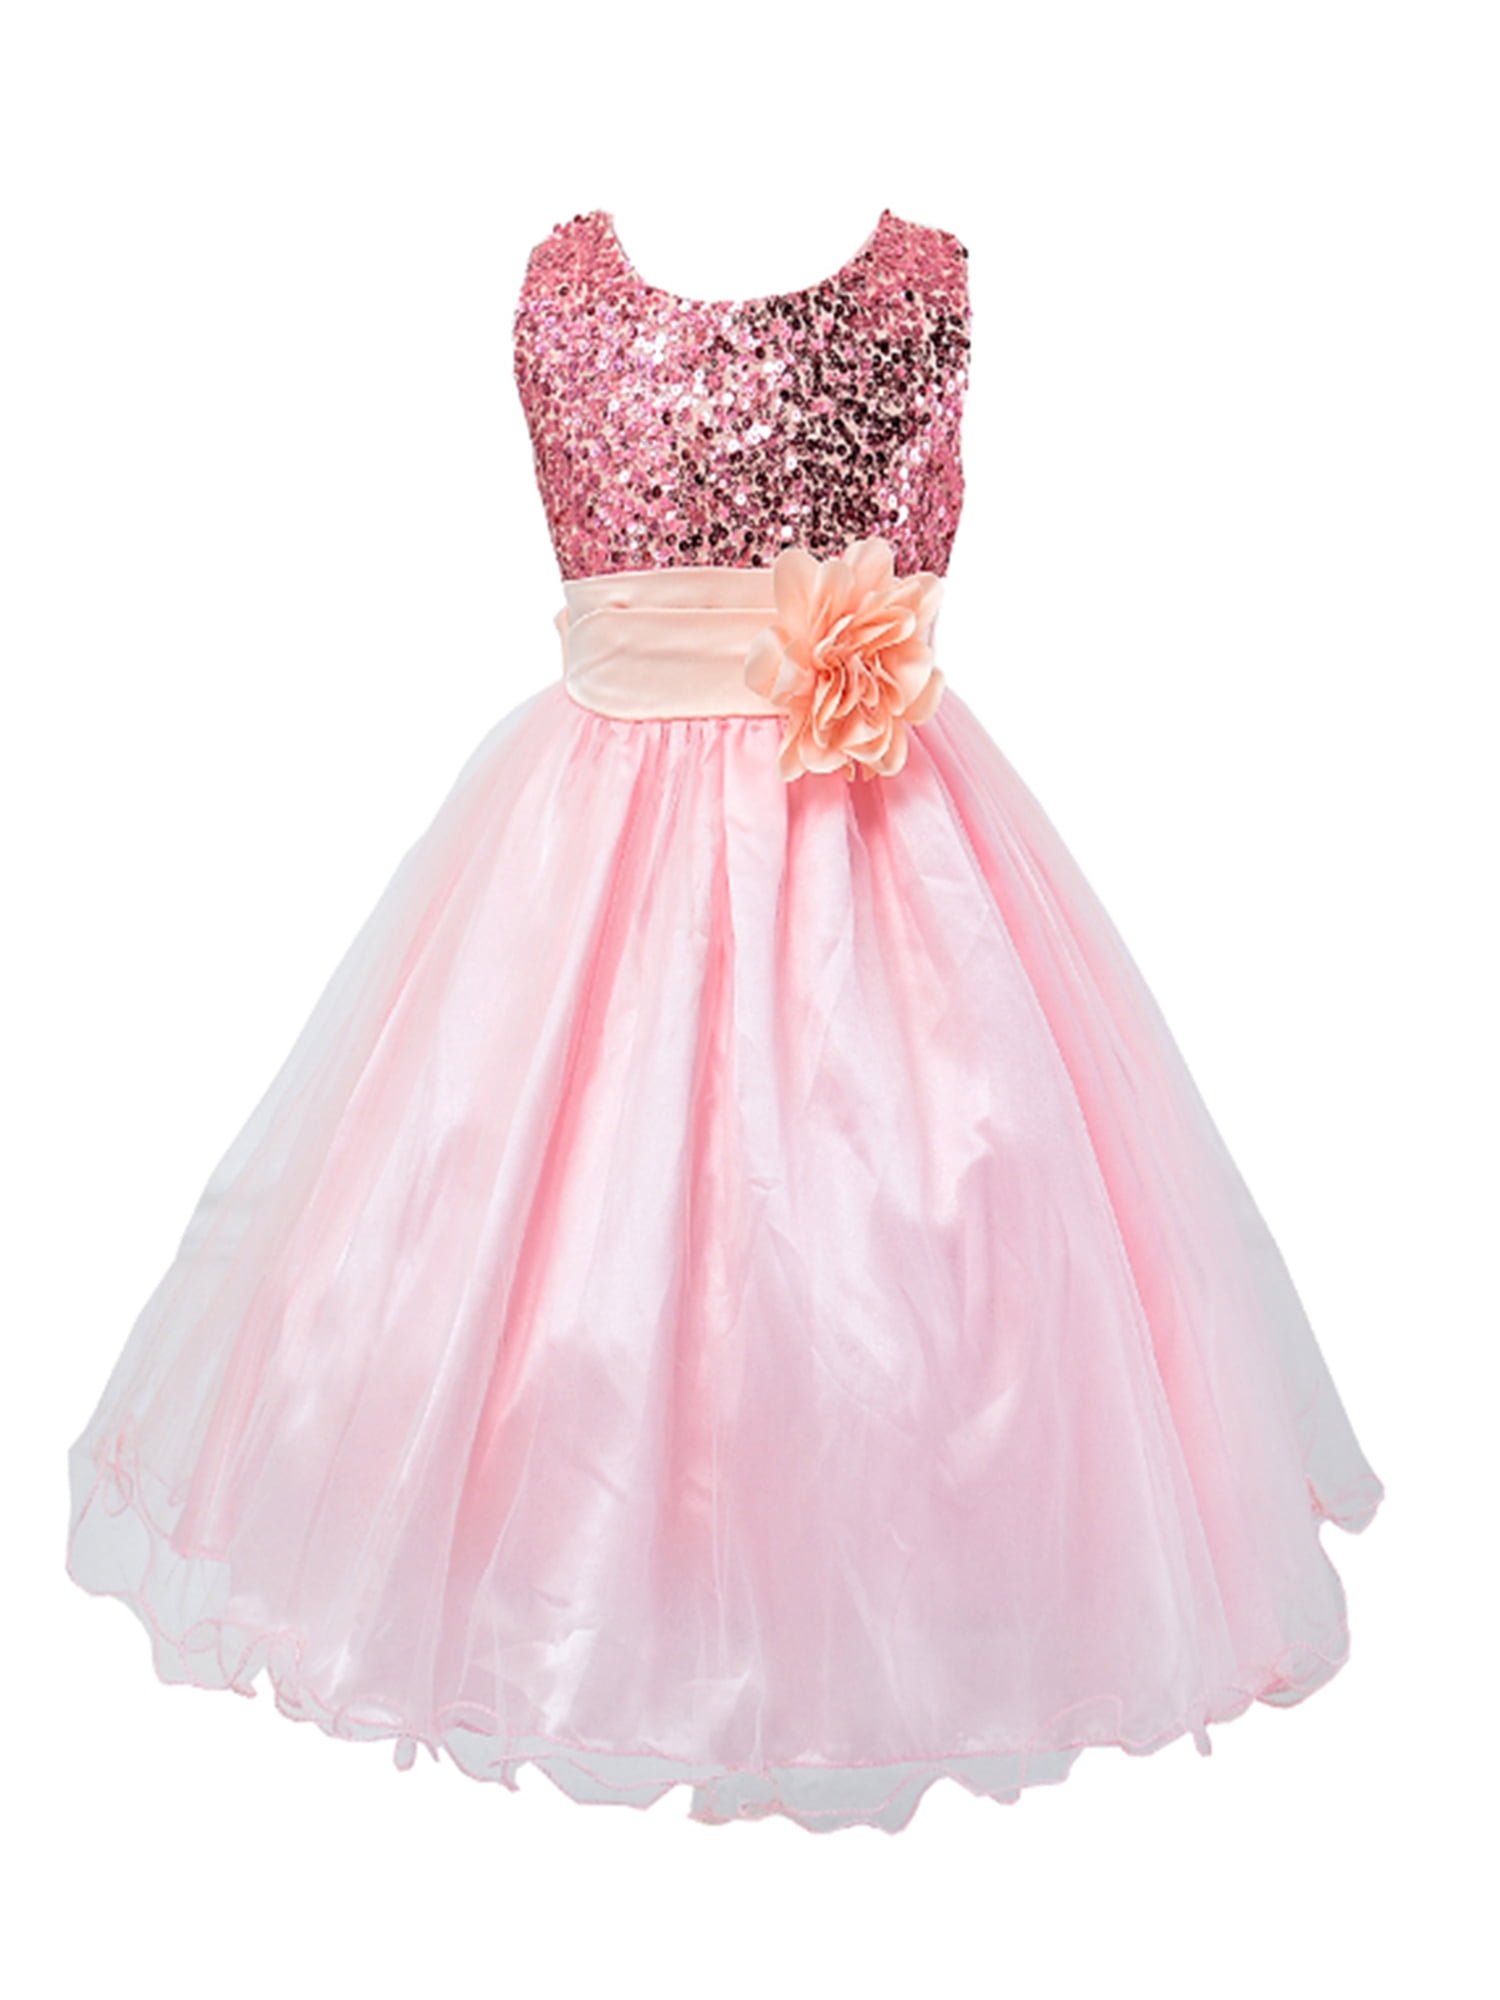 StylesILove Lovely Sequin Flower Girl Dress, 5 Colors (3-4 Years, Pink ...